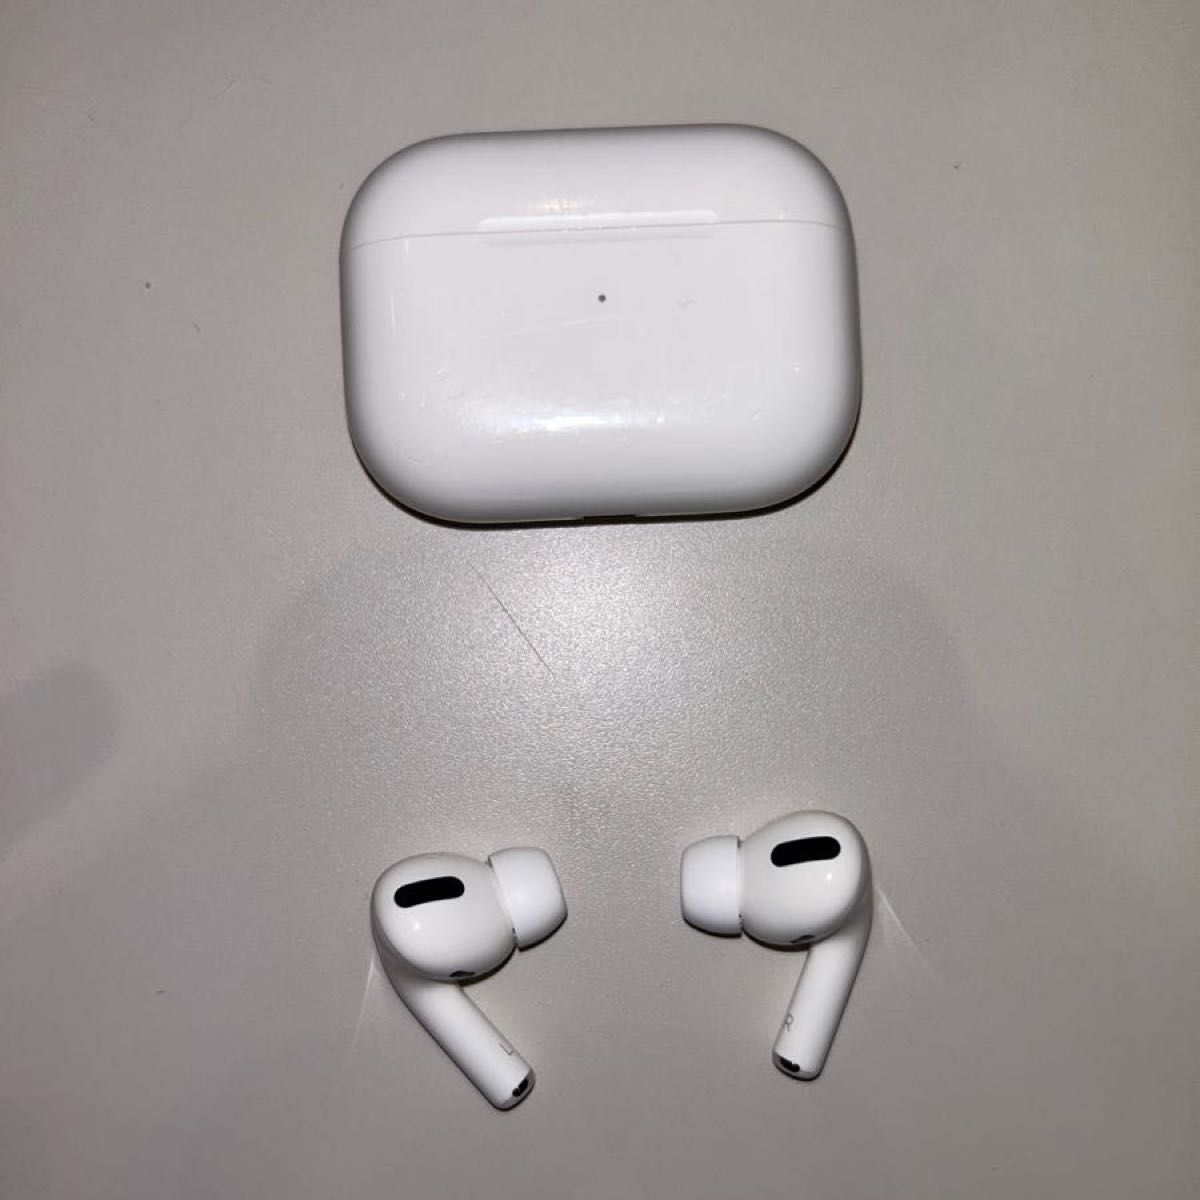 AirPods Pro 第1世代 充電ケース＋両耳｜PayPayフリマ